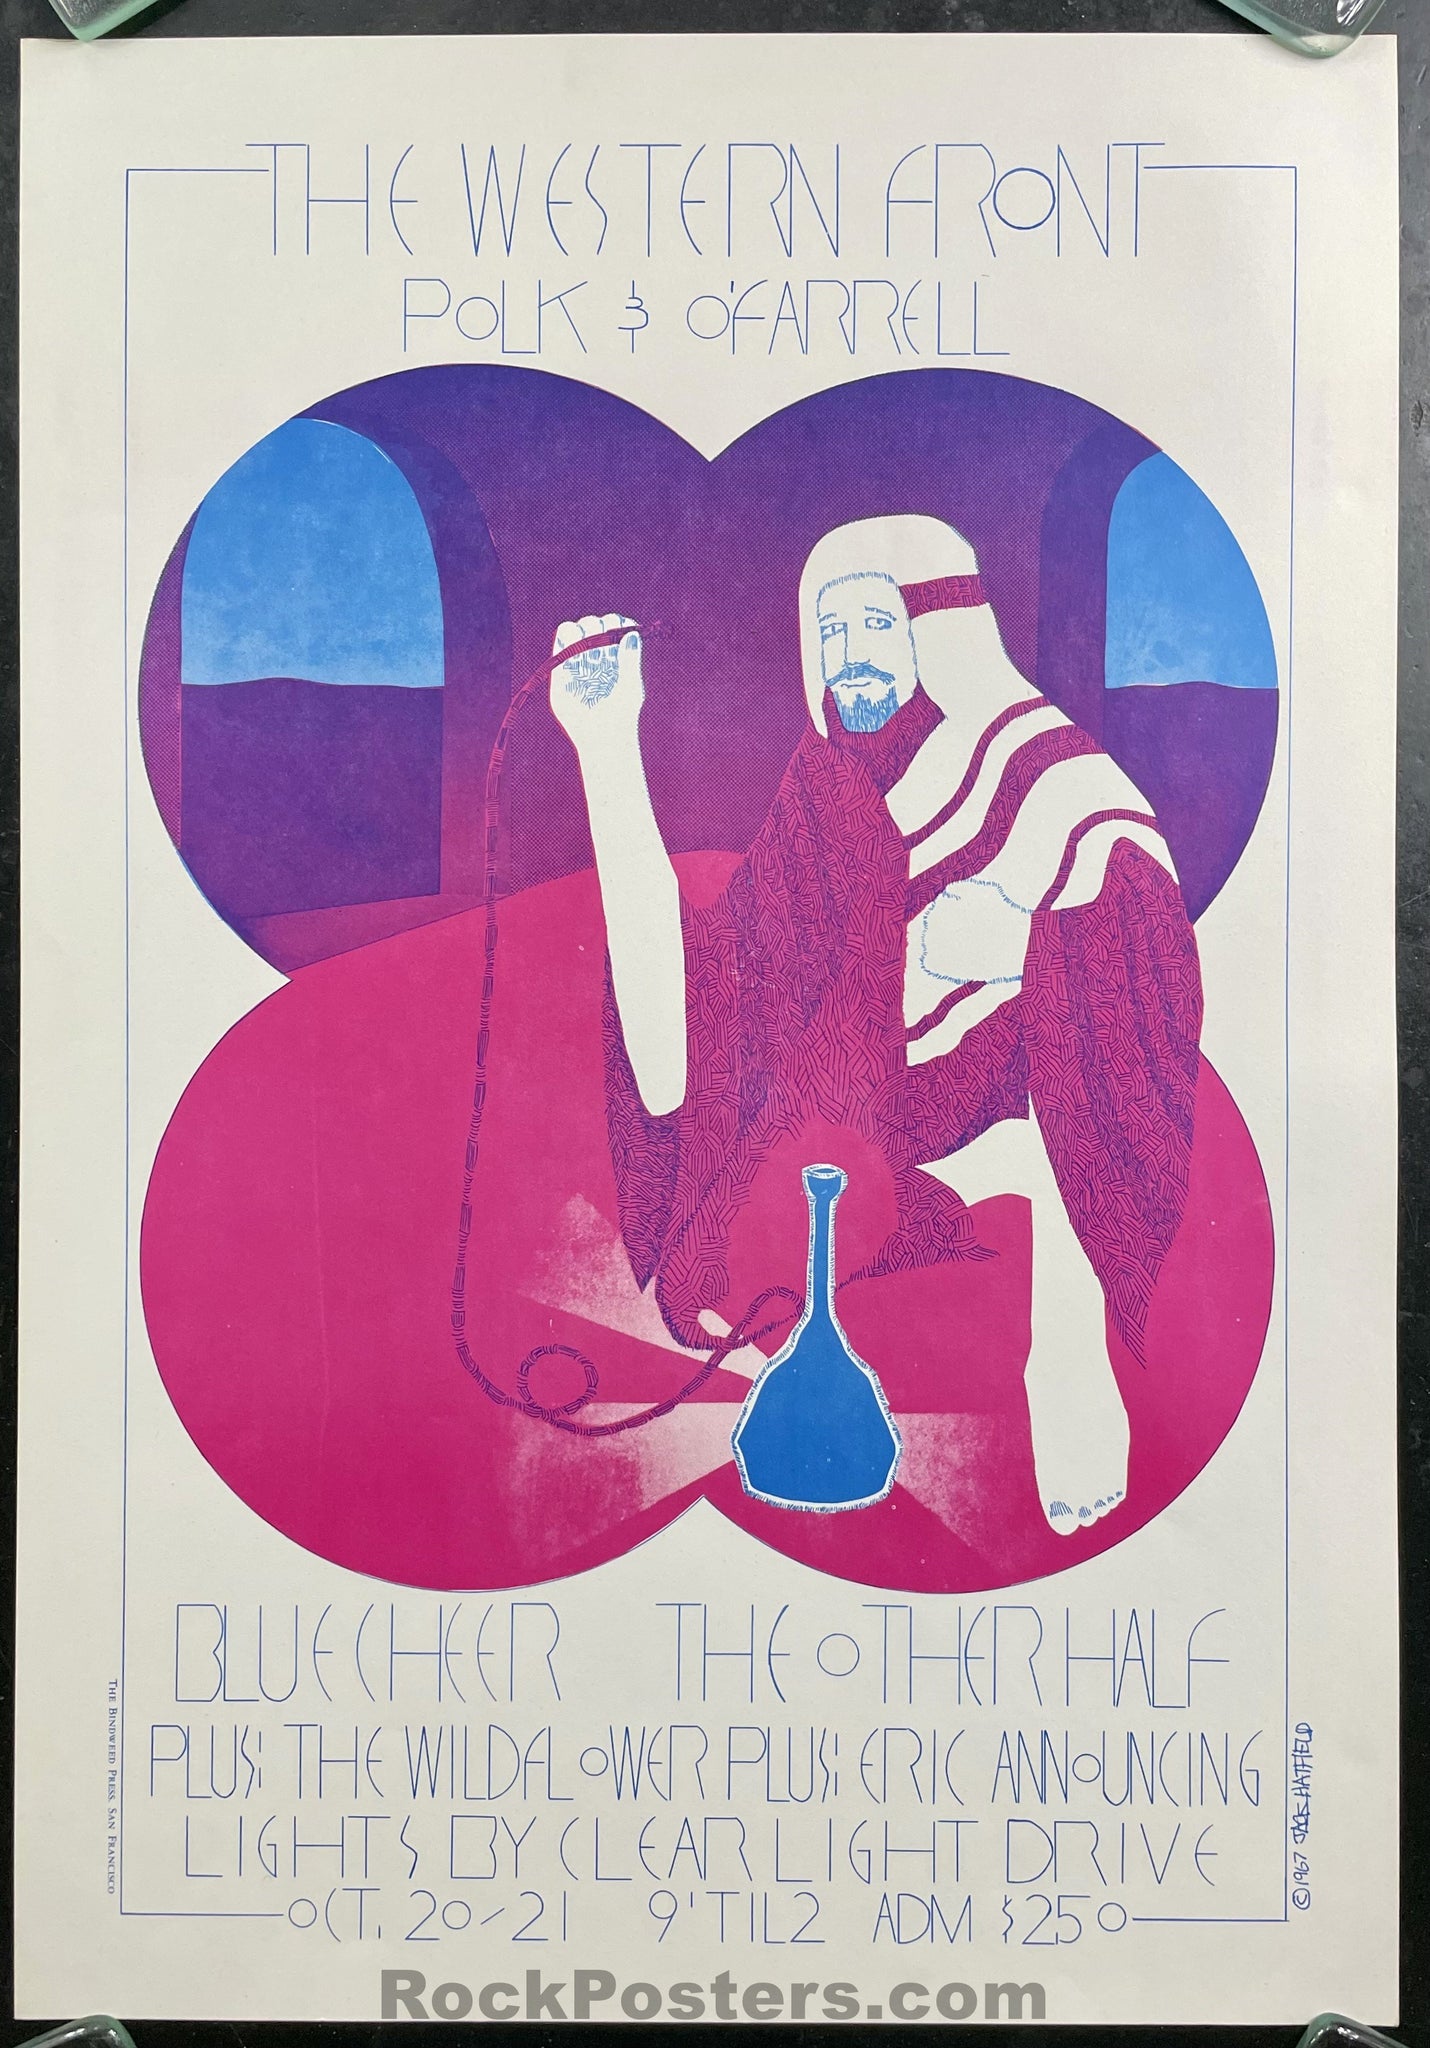 AUCTION - Blue Cheer - 1967 Poster - Western Front - Near Mint Minus